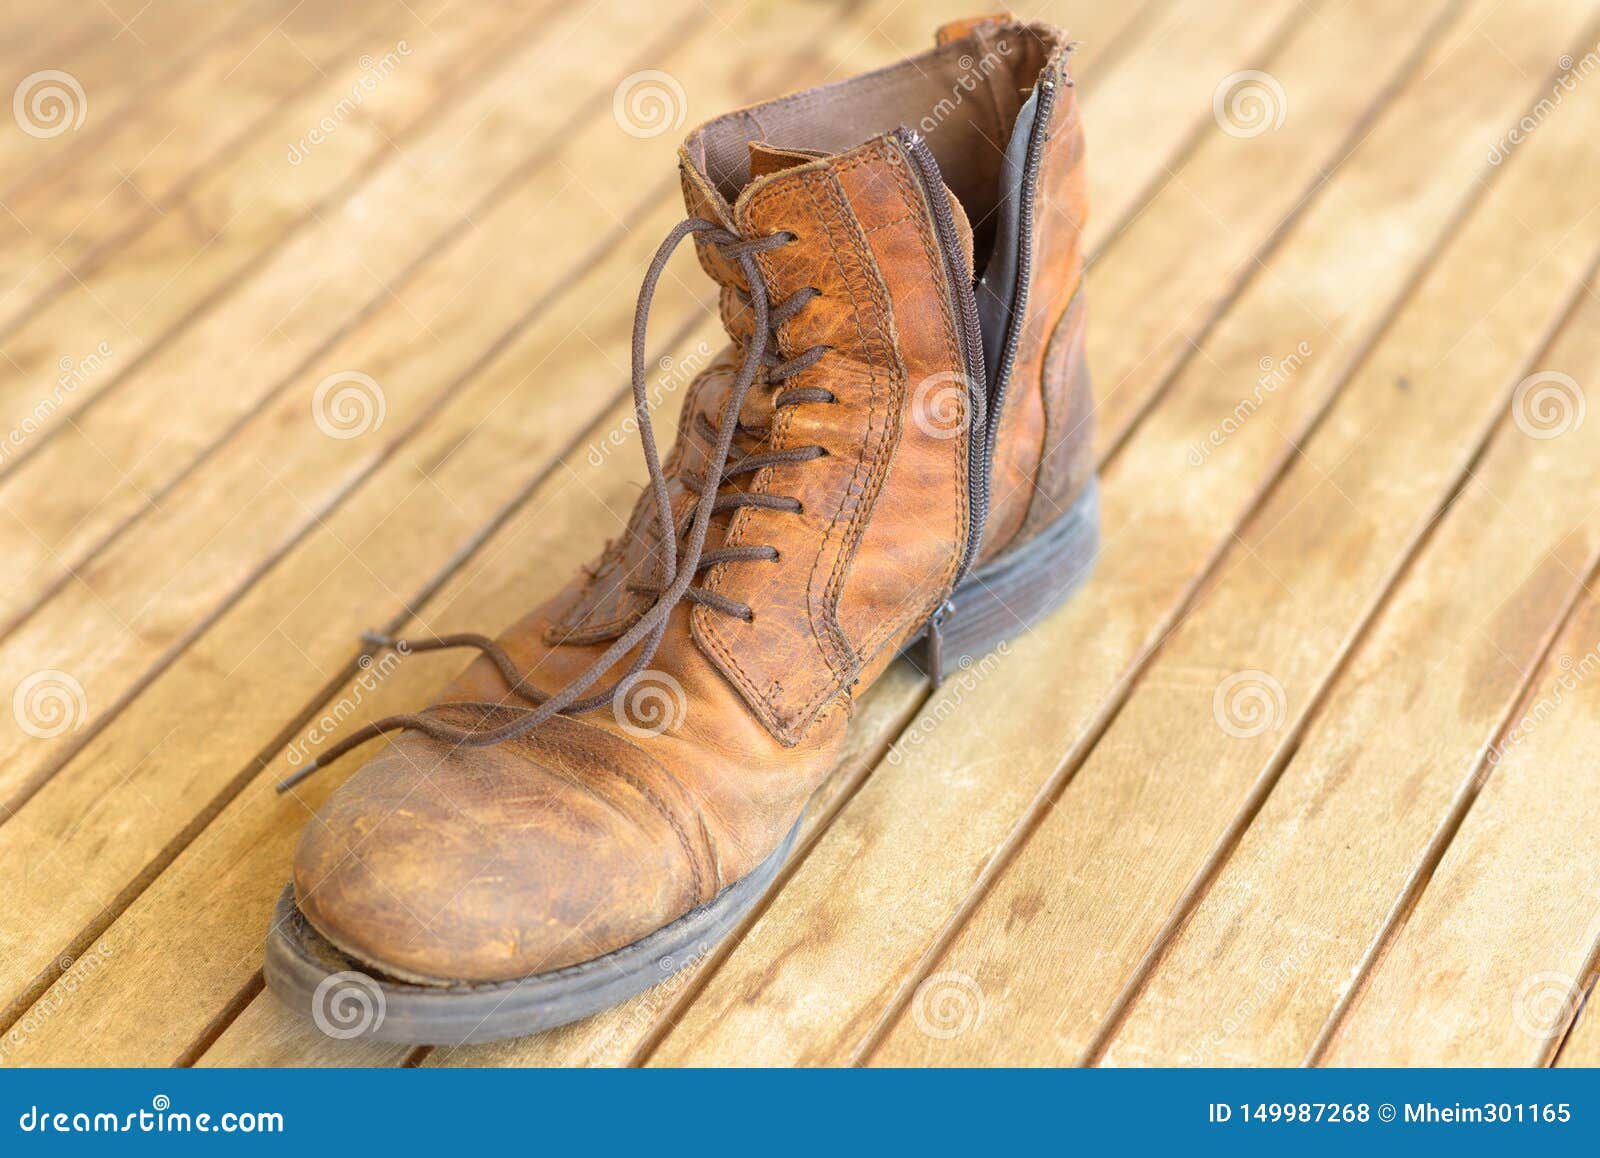 Single Old Well Worn Leather Hiking Boot Stock Photo - Image of broken ...